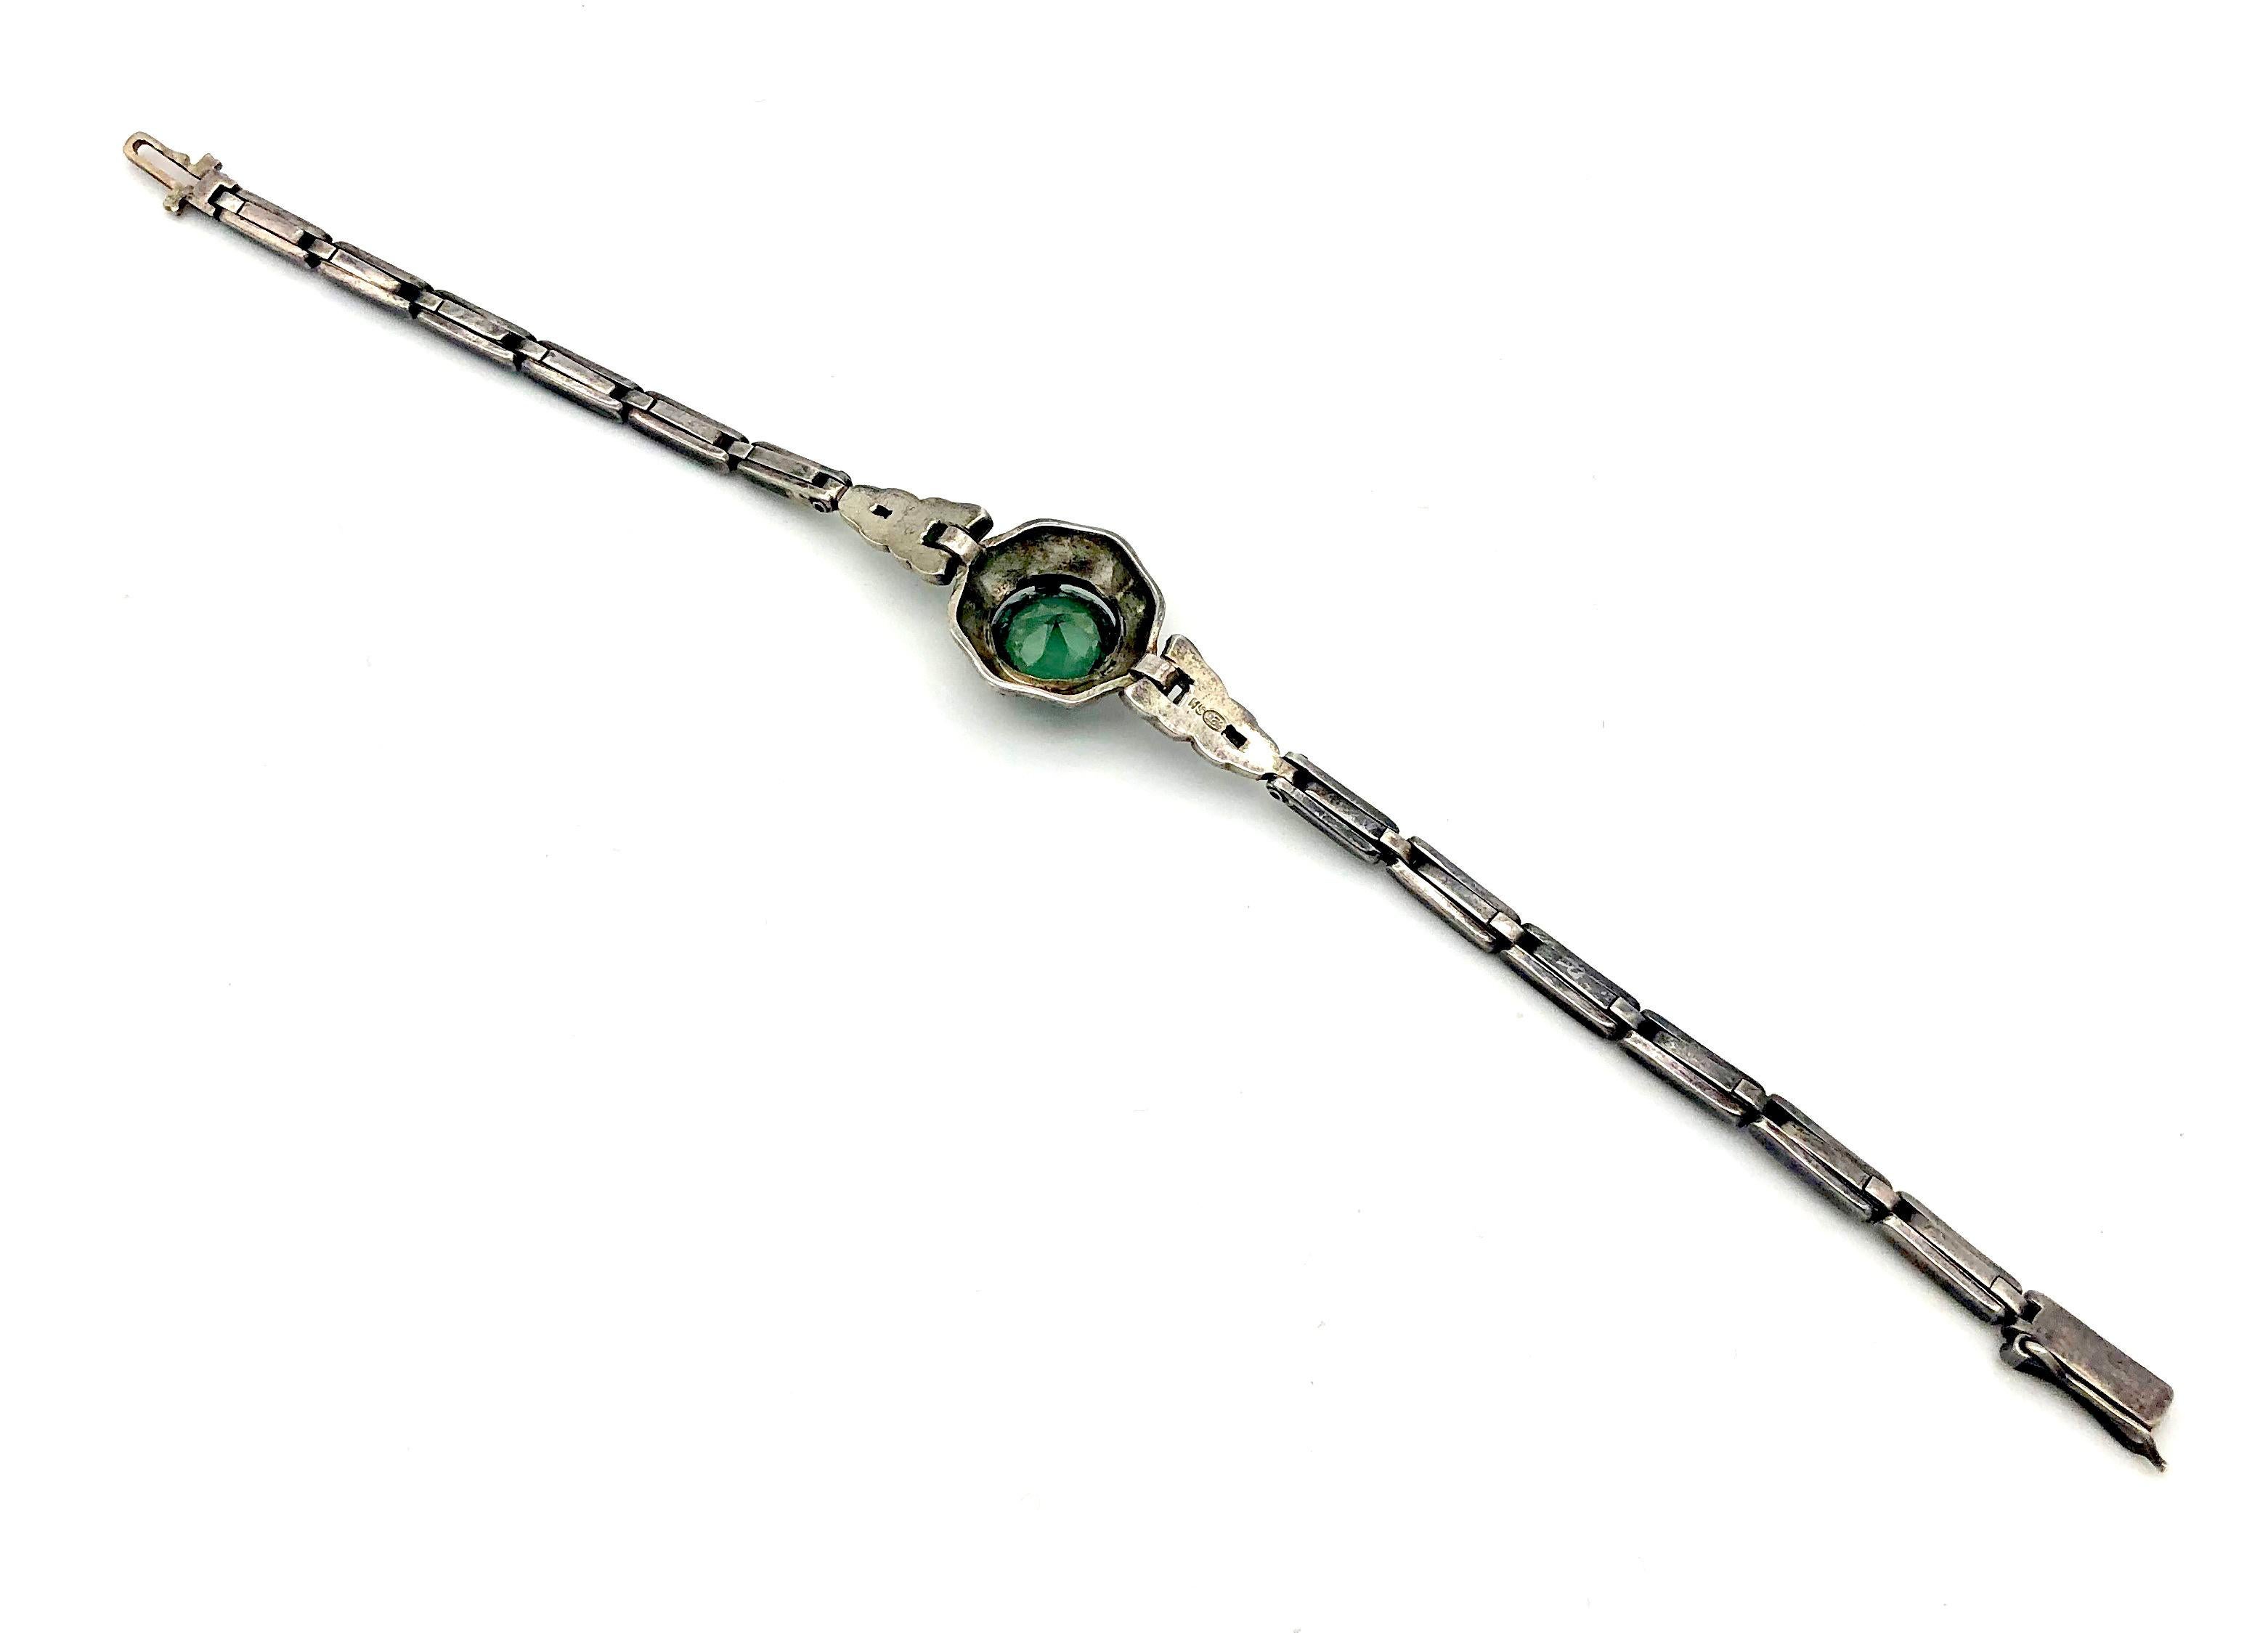 This elegant silver Art Deco link bracelet was made in 1920 ca. The octagonal centerpiece with softened edges is set with a deep gras green glass stone. To either side the center piece is embedded by typical Art Deco elements, one of which is